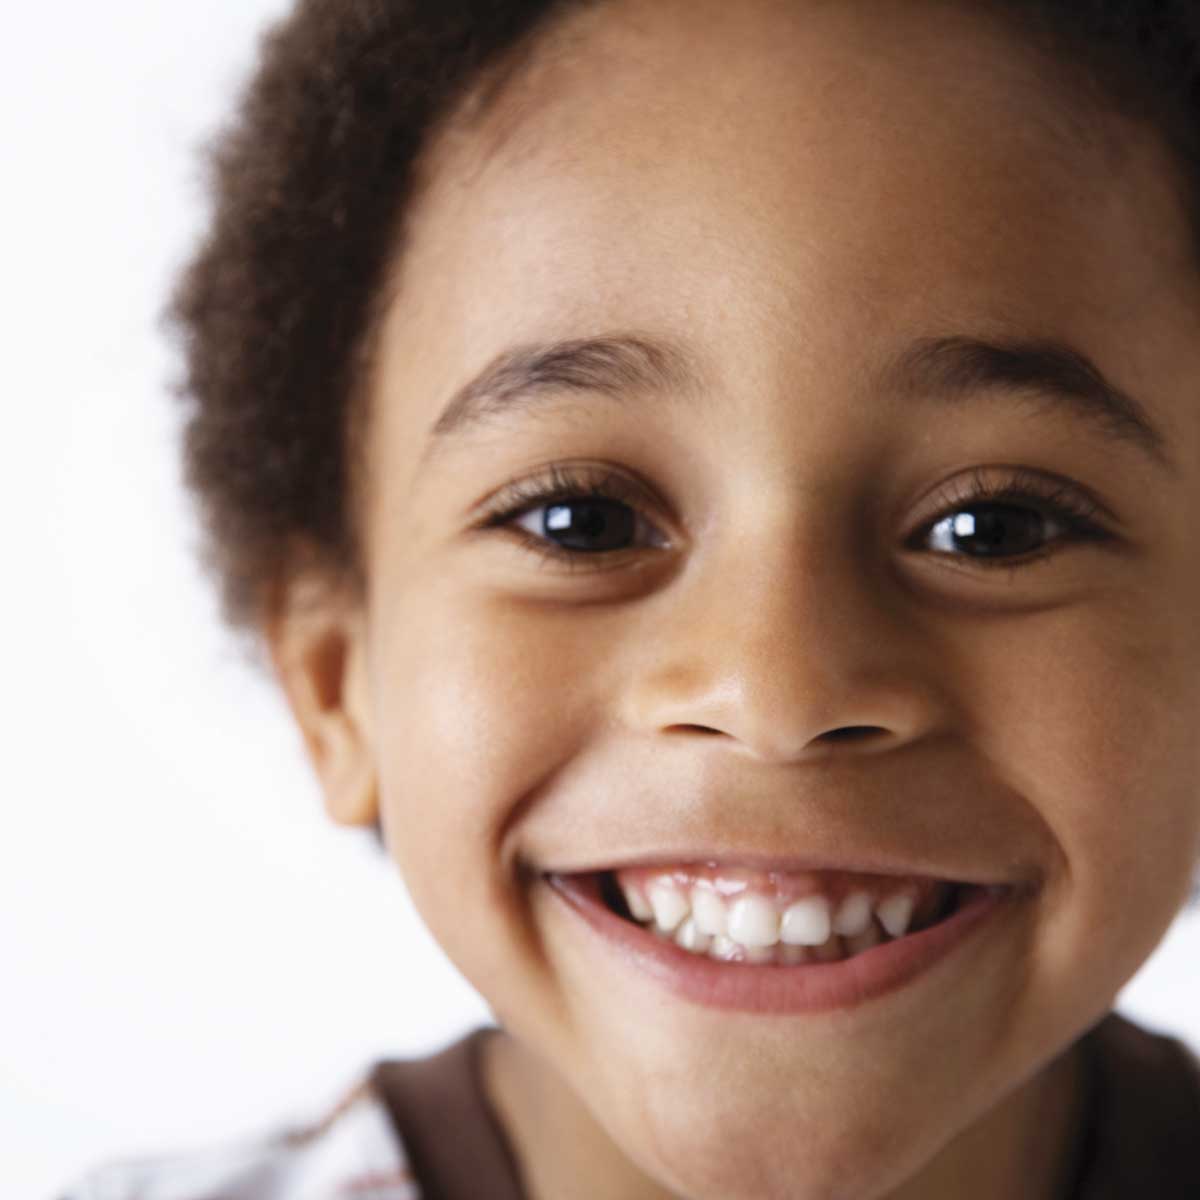 Three Commonly Asked Questions About Children’s Teeth from a Pediatric Dentist